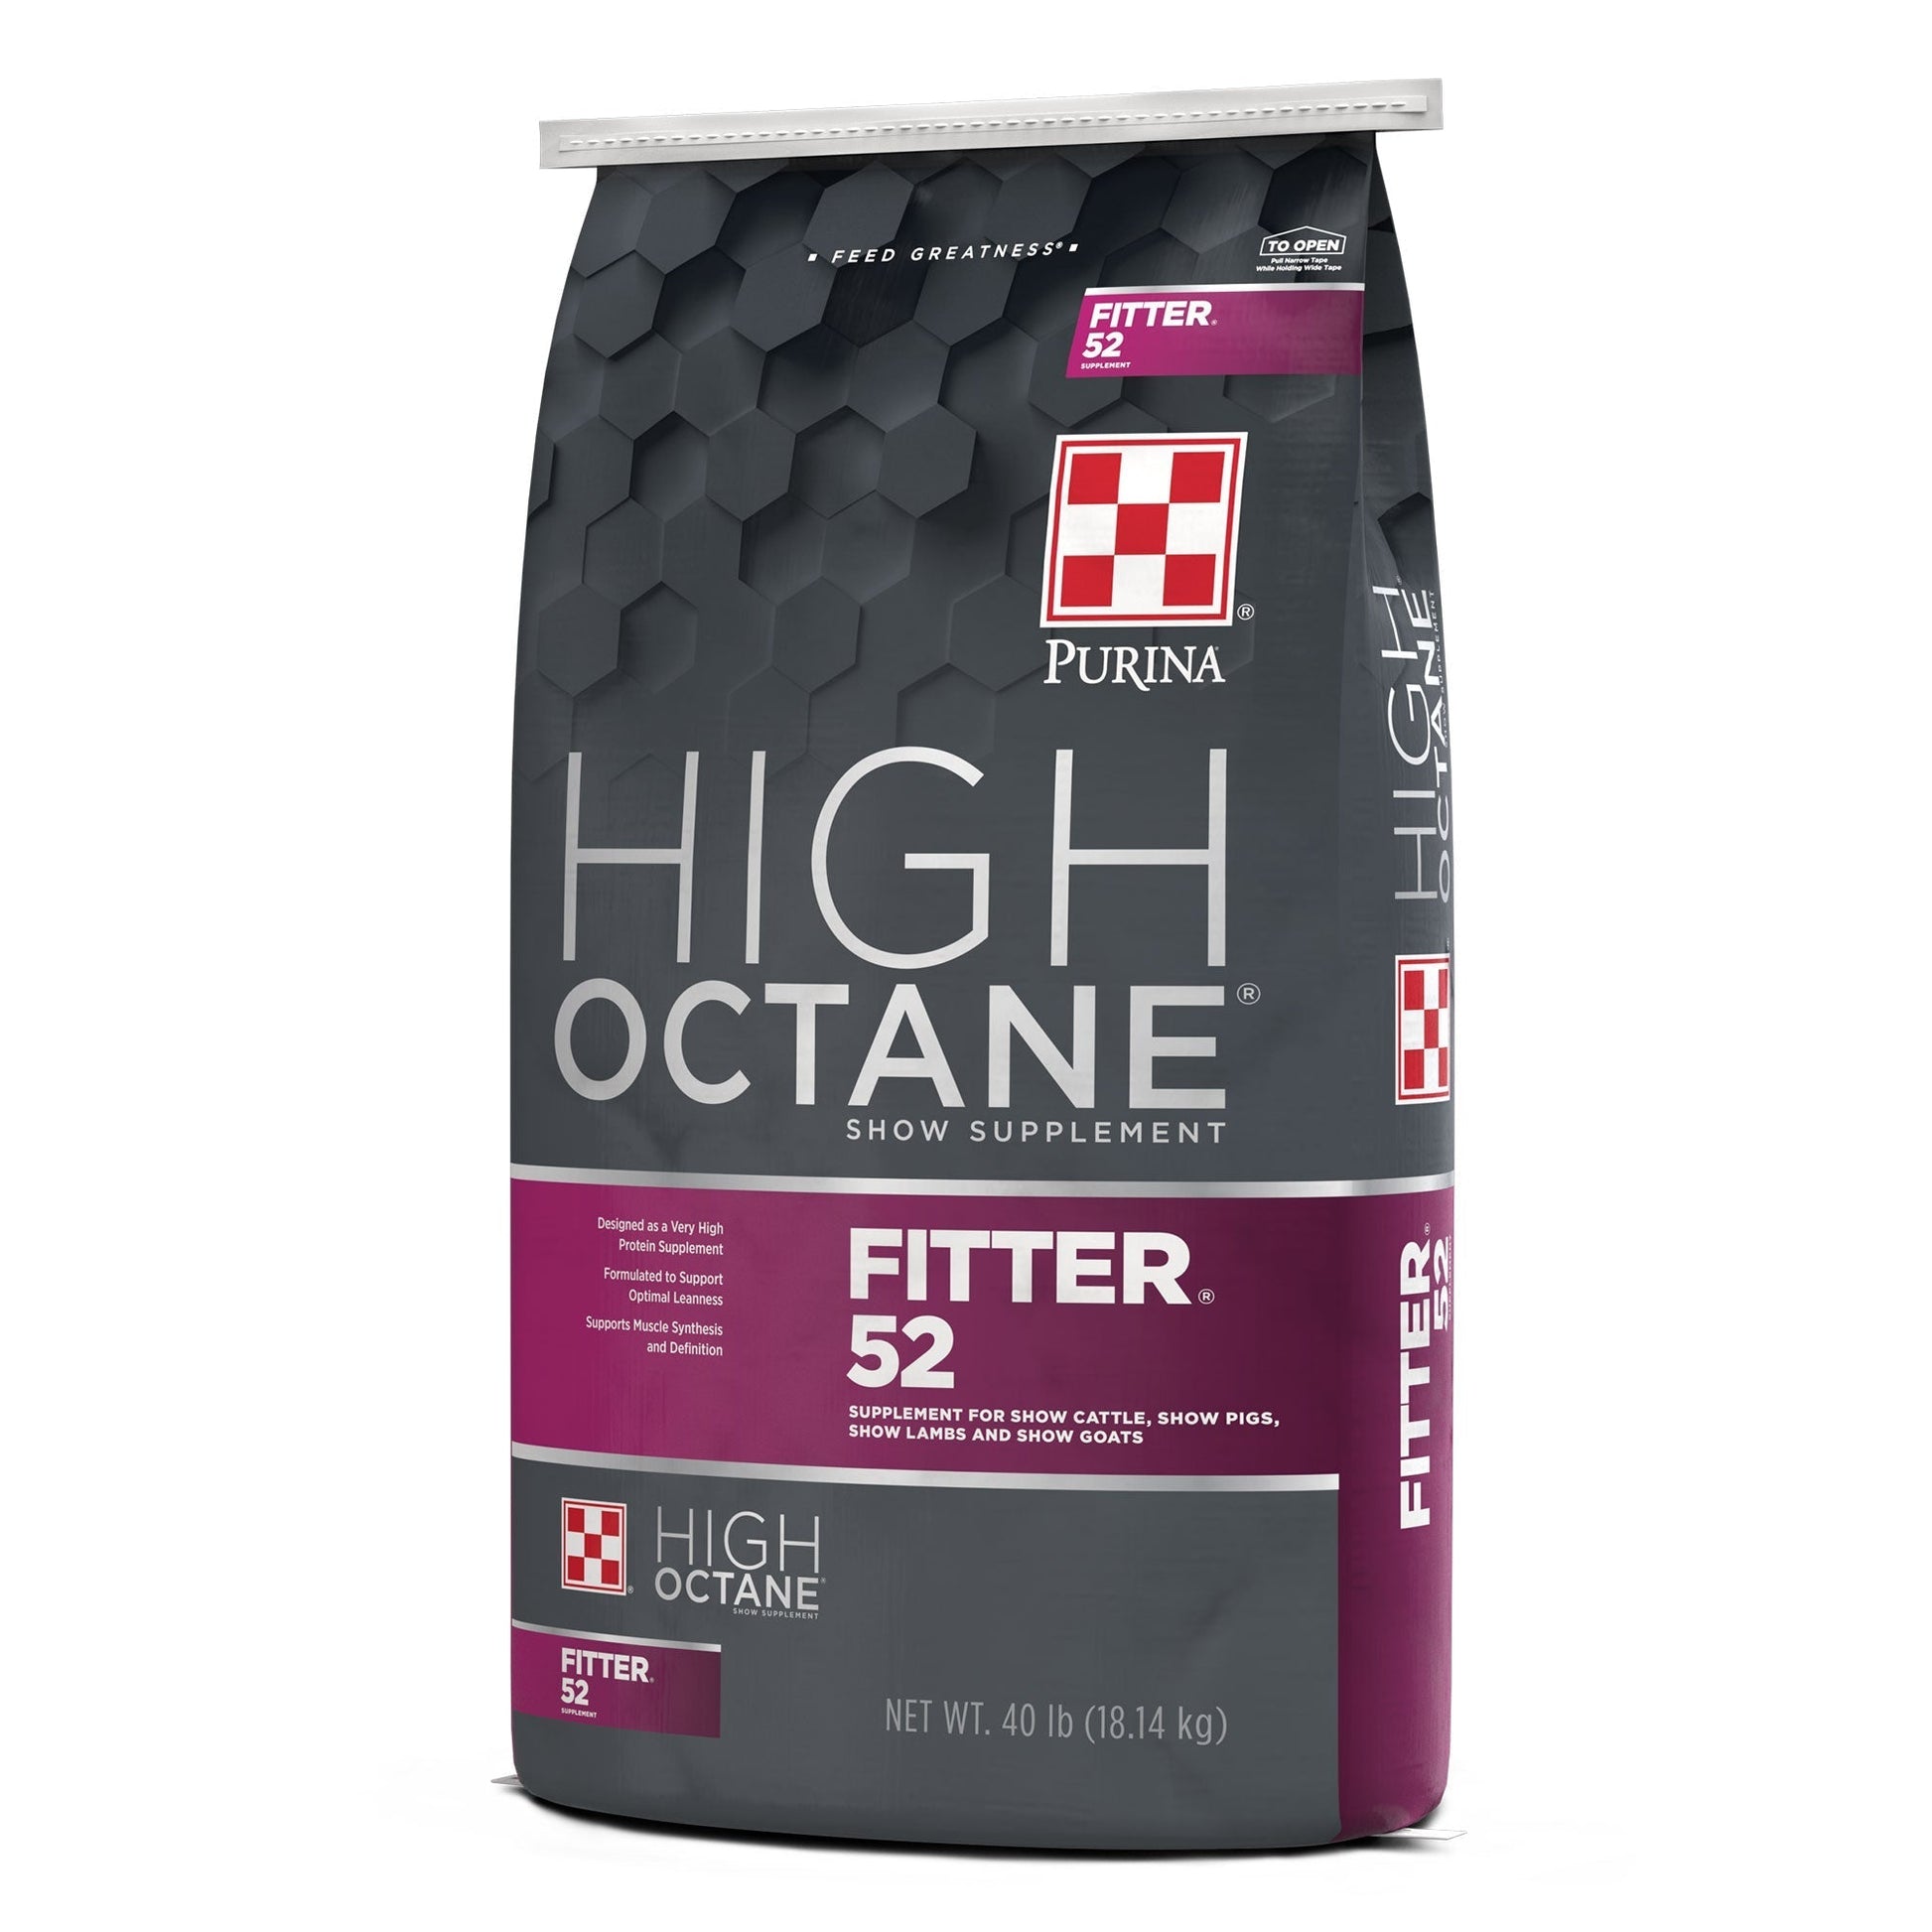 Right angle of Purina® High Octane® Fitter 52™ Show Supplement